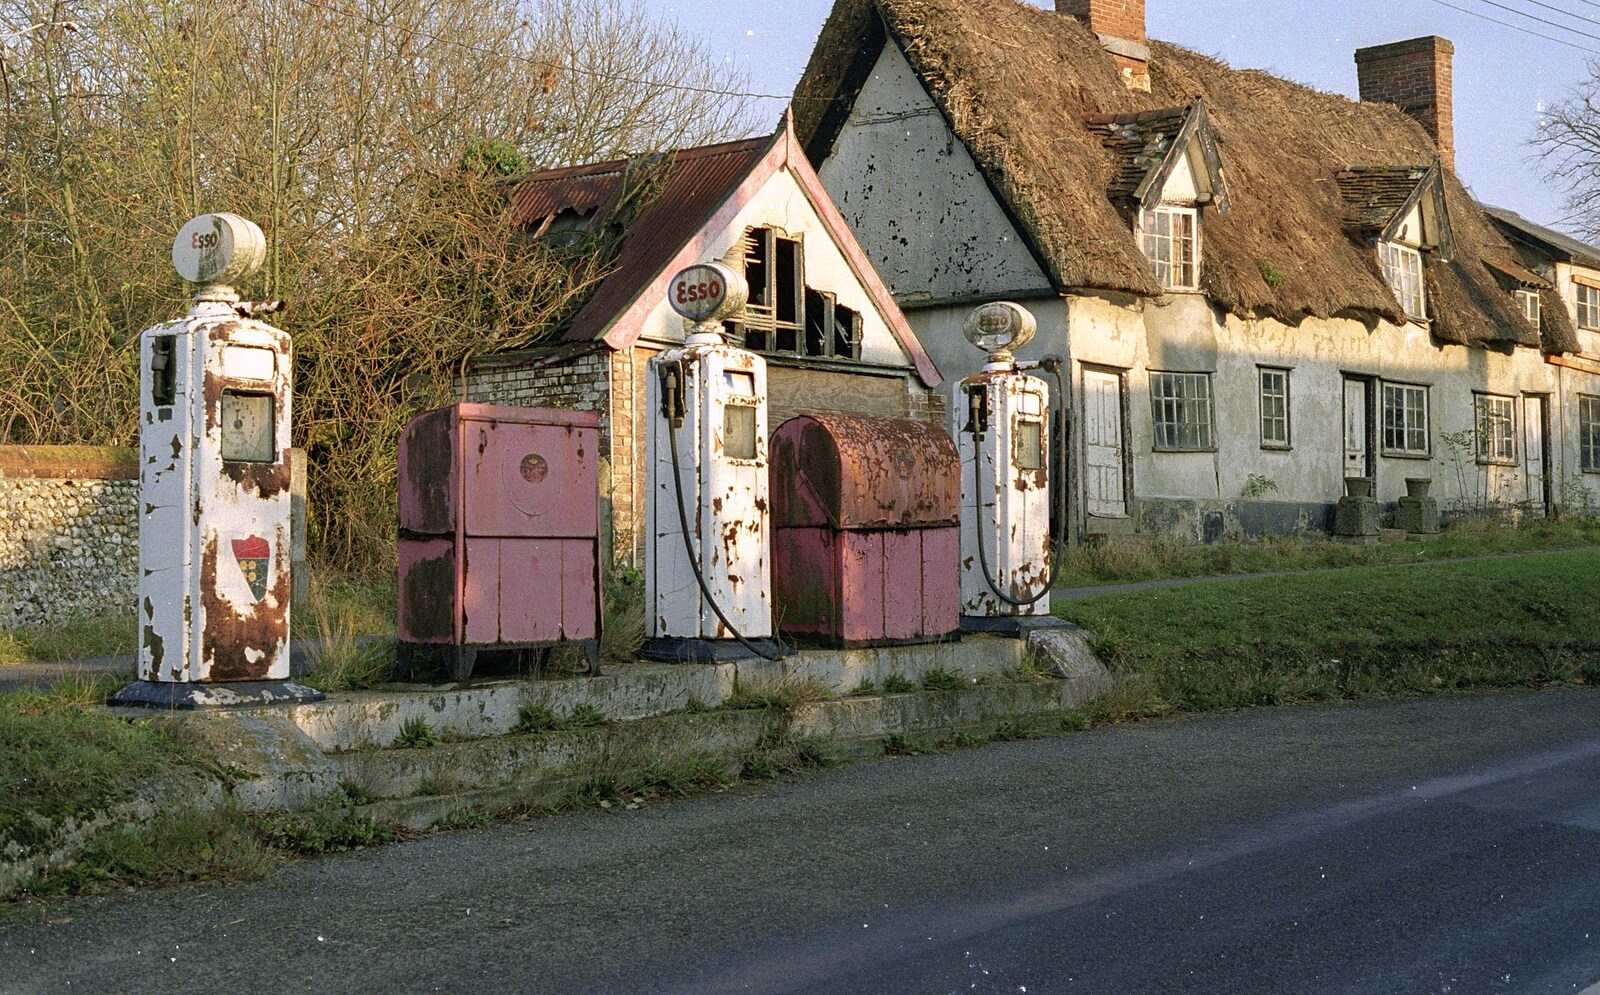 The derelict Redgrave Petrol Station from The Old Redgrave Petrol Station, and some Hand Bells, Suffolk and Long Stratton - 8th October 1990